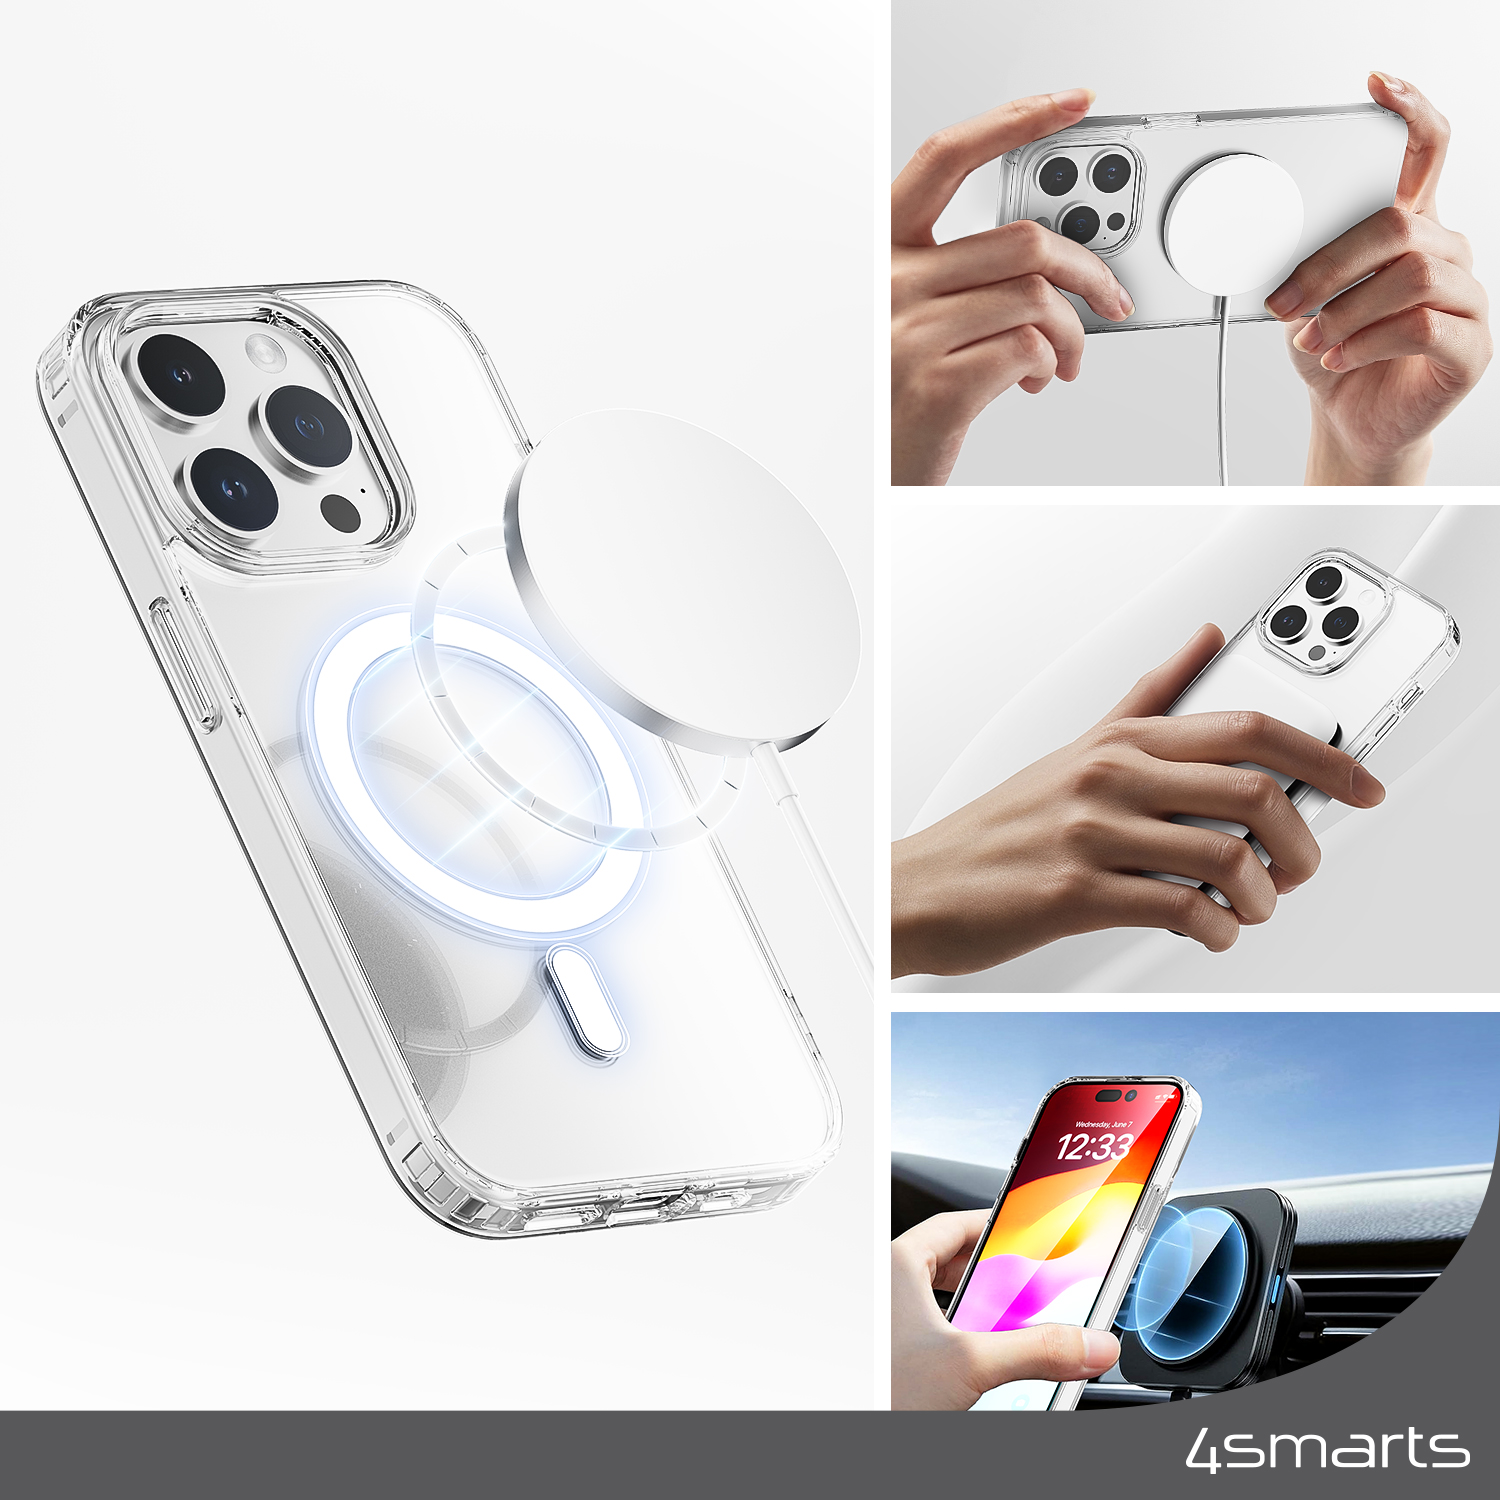 The 4smarts 3in1 Premium Starter Set for Apple iPhone 15 Pro features a MagSafe-compatible phone case with precisely aligned, integrated magnets that fit perfectly to the smartphone for easy attachment and faster wireless charging.